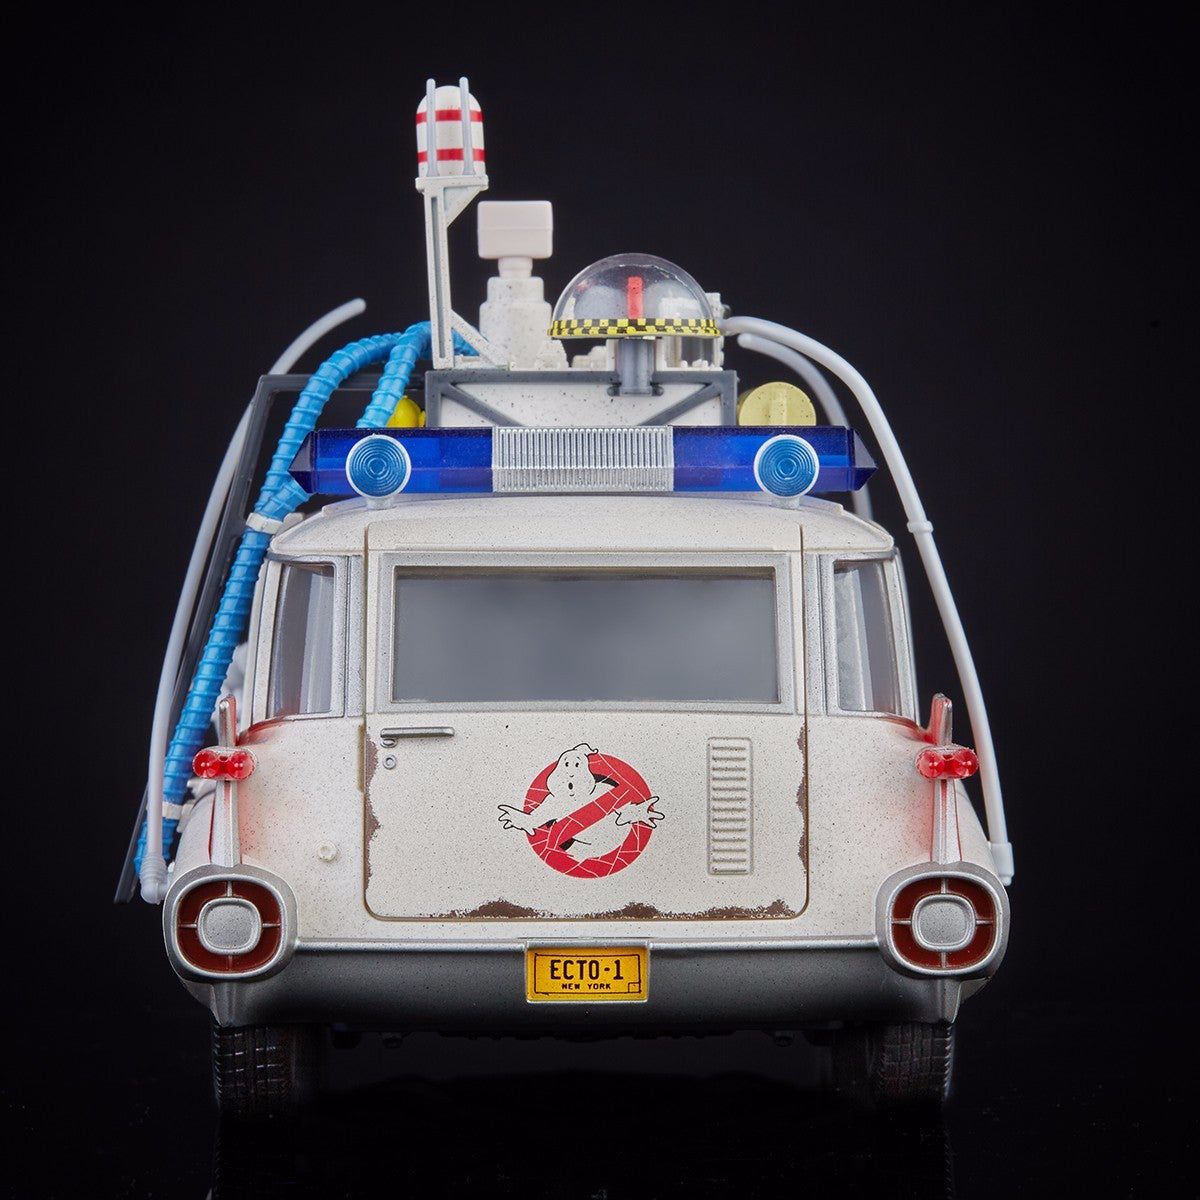 Ghostbusters Afterlife Ecto 1 Toy images #4